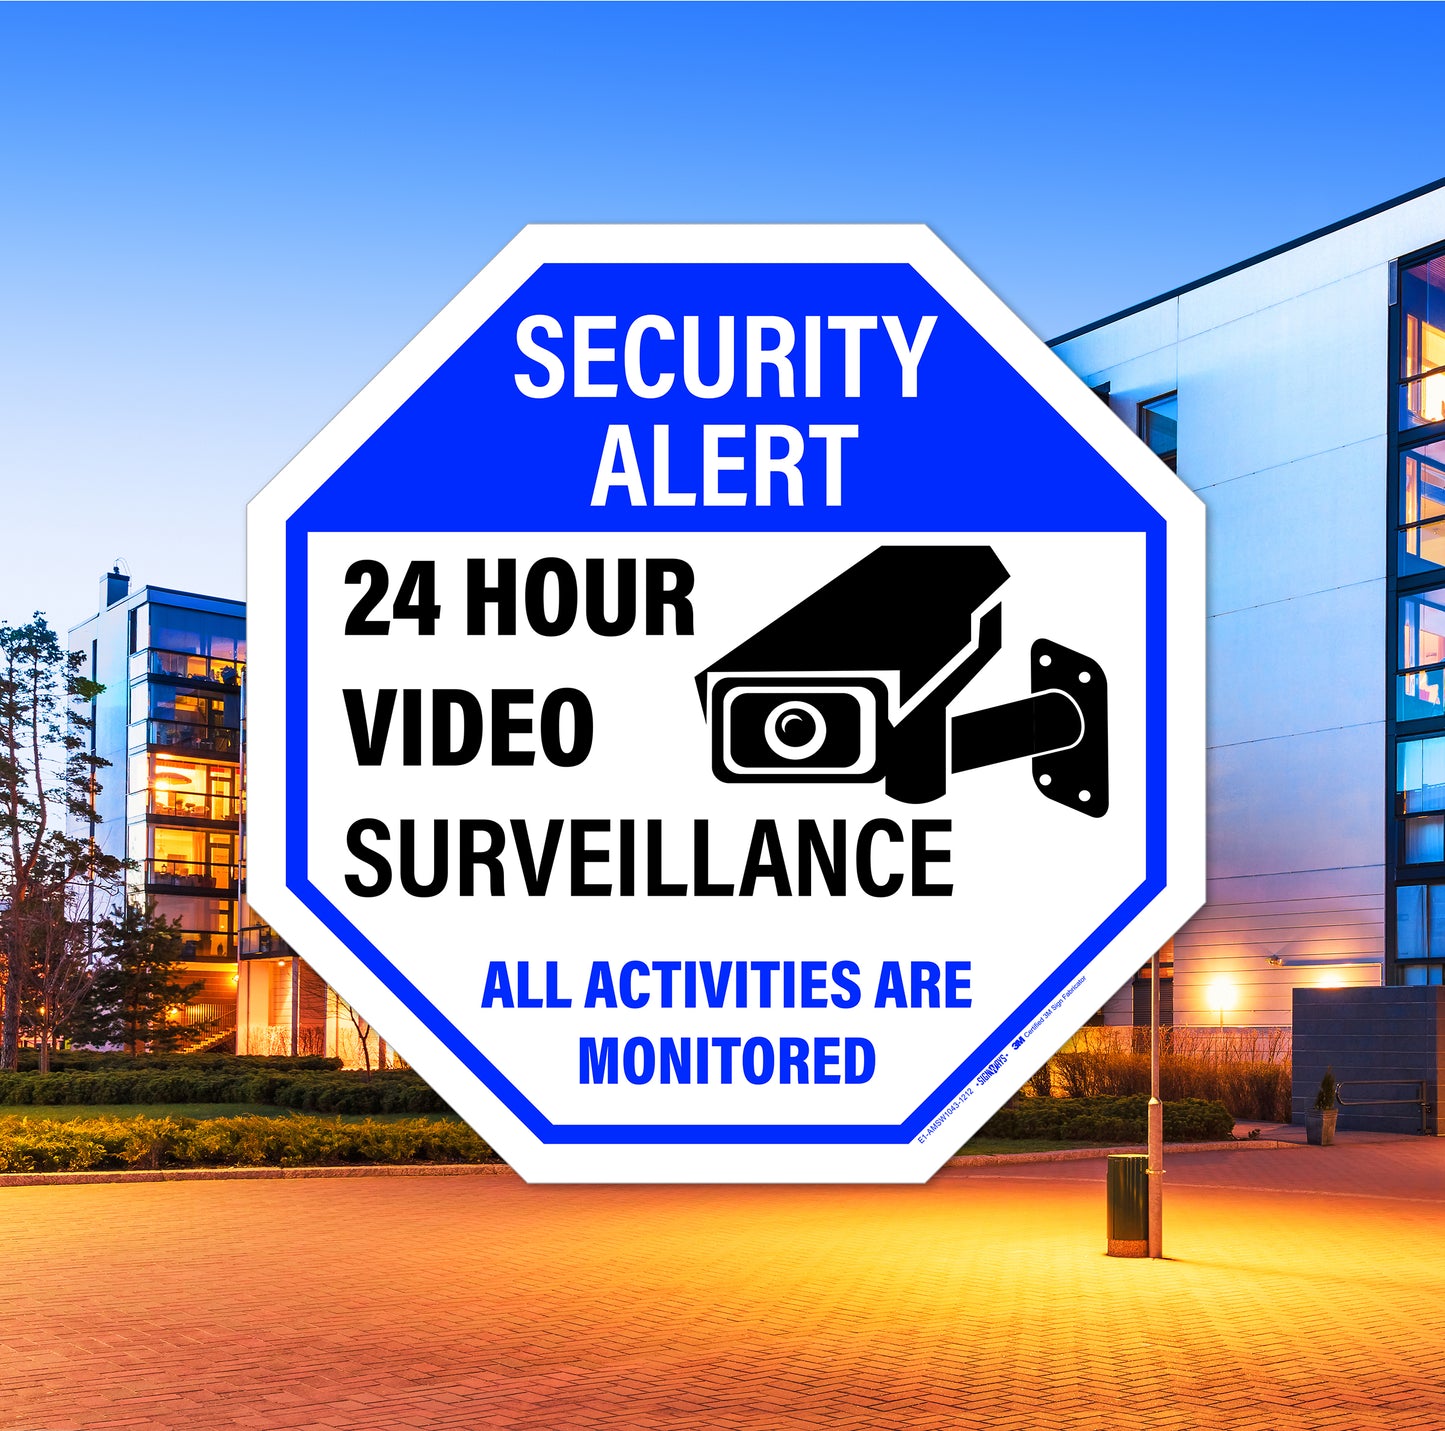 Security Alert 24 hour video surveillance all activities are monitored sign